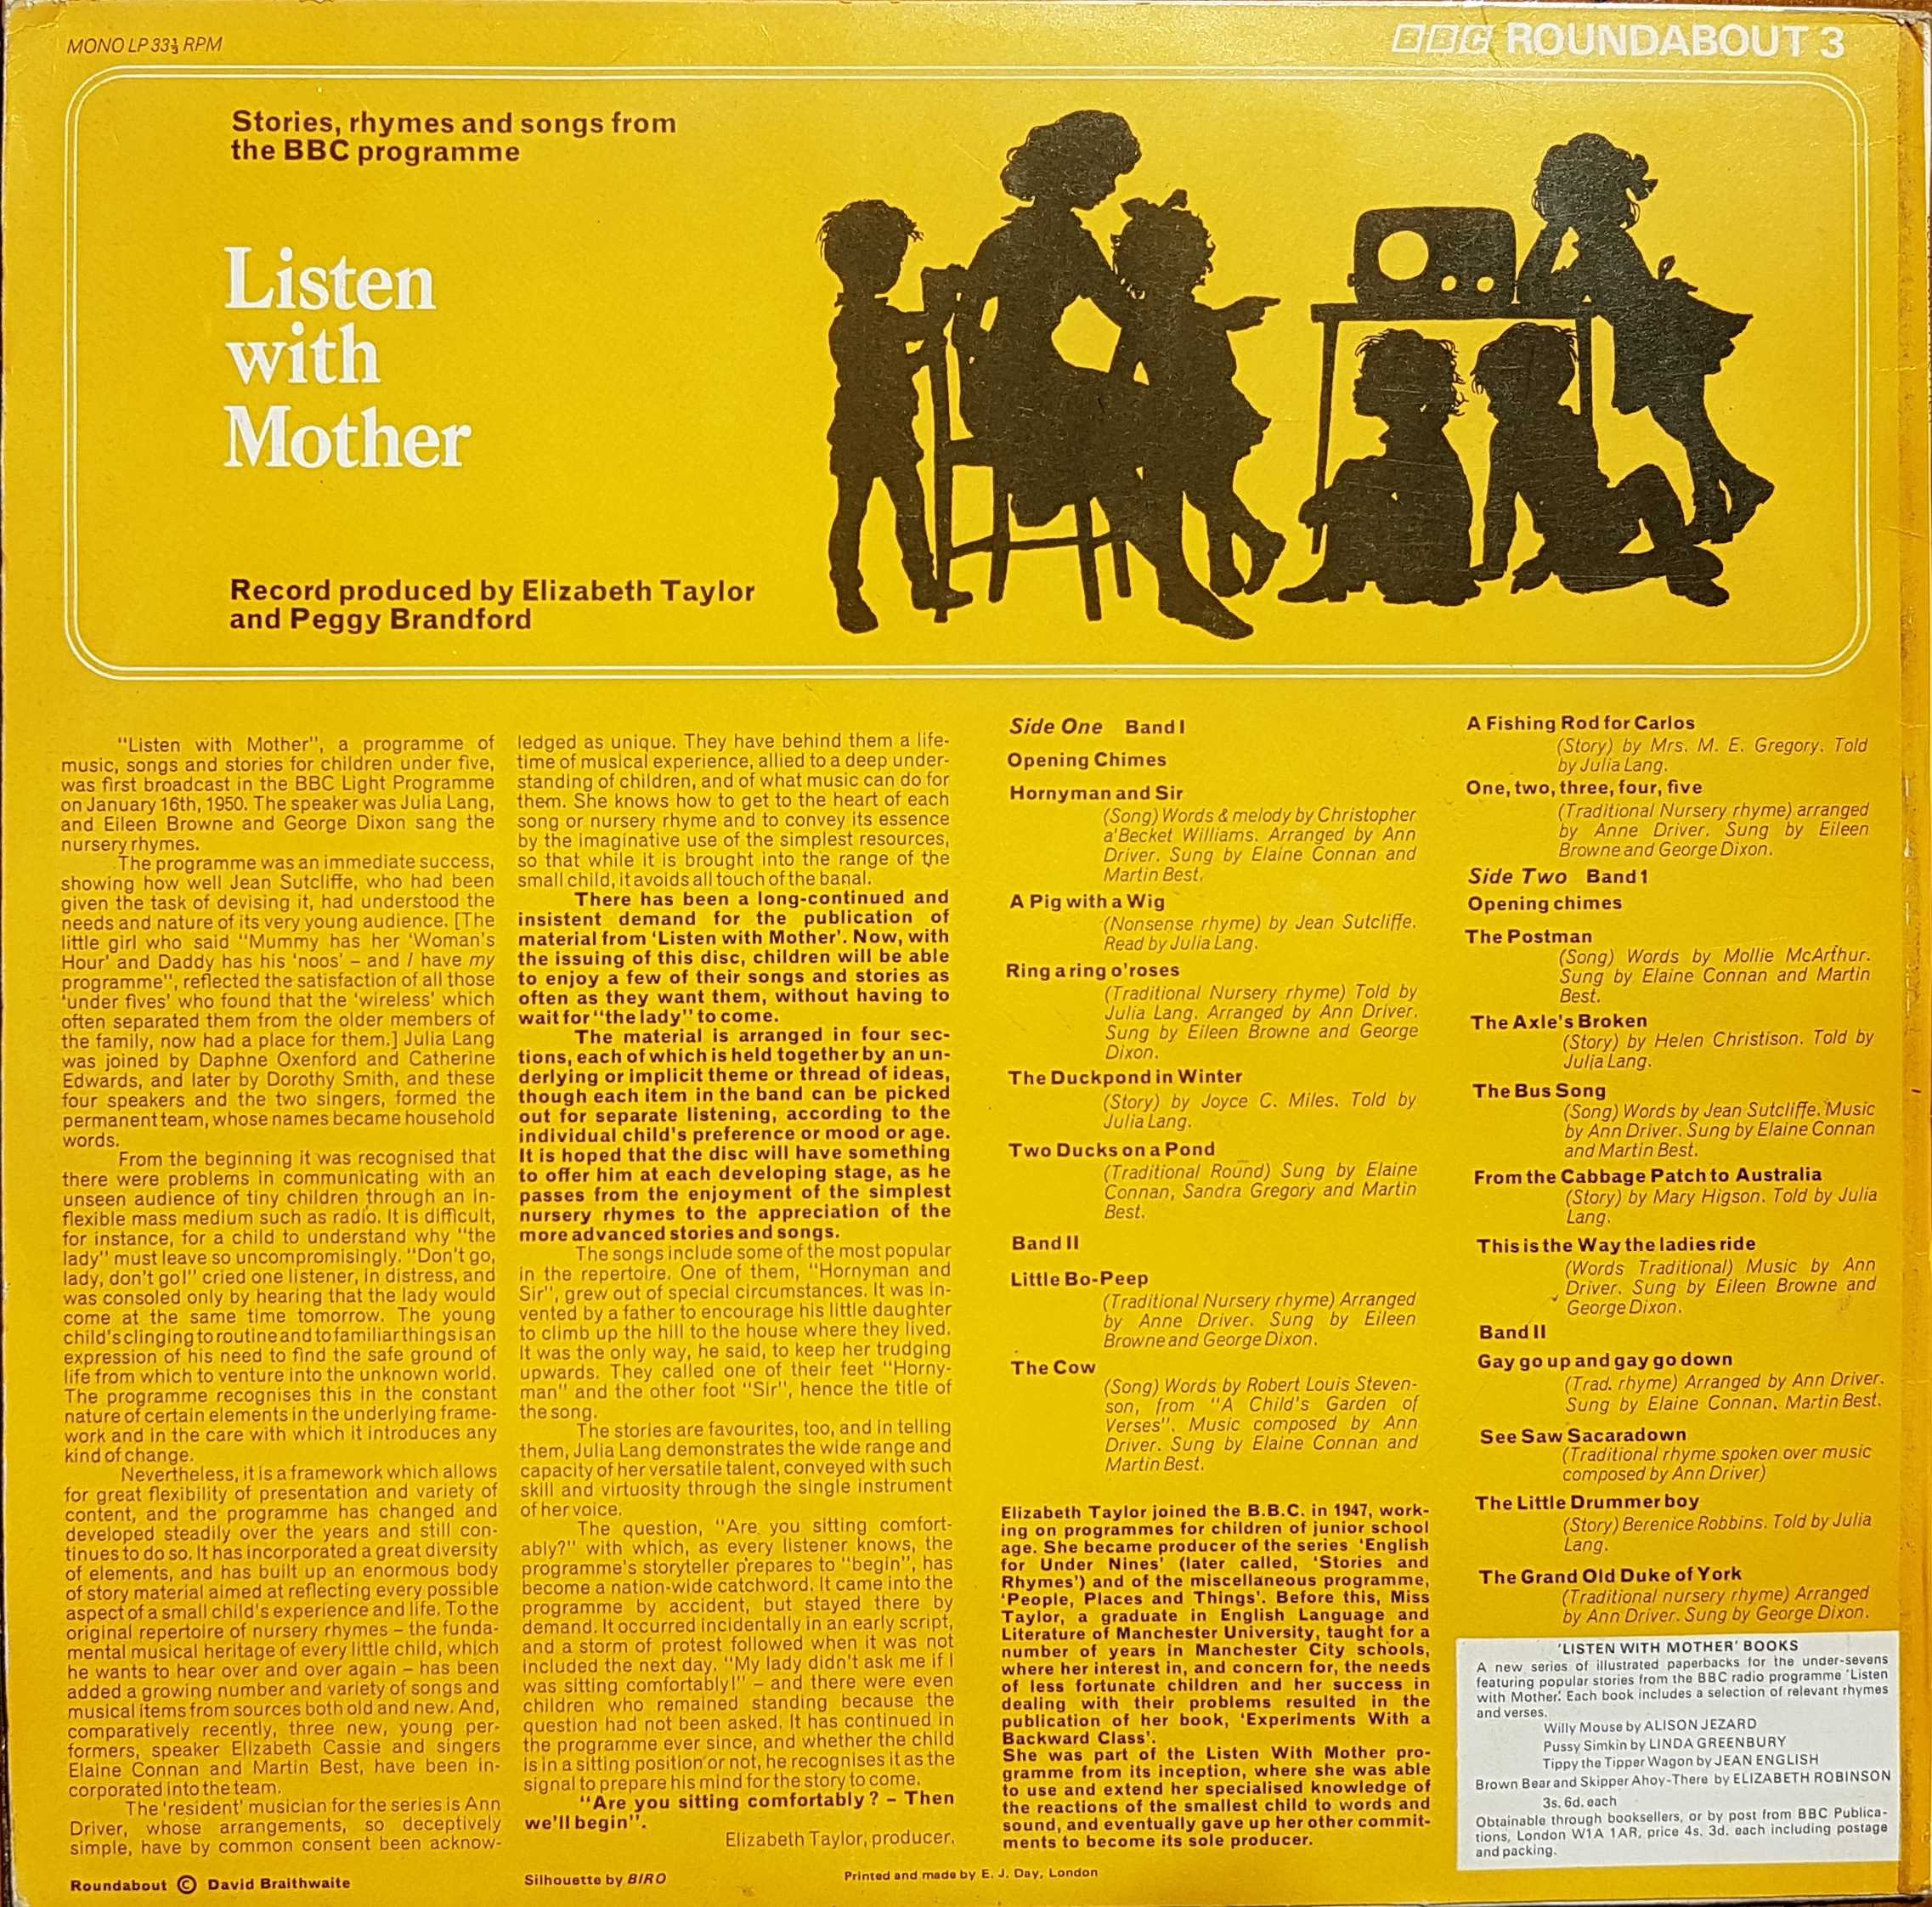 Picture of RBT 3 Listen with mother by artist Various from the BBC records and Tapes library